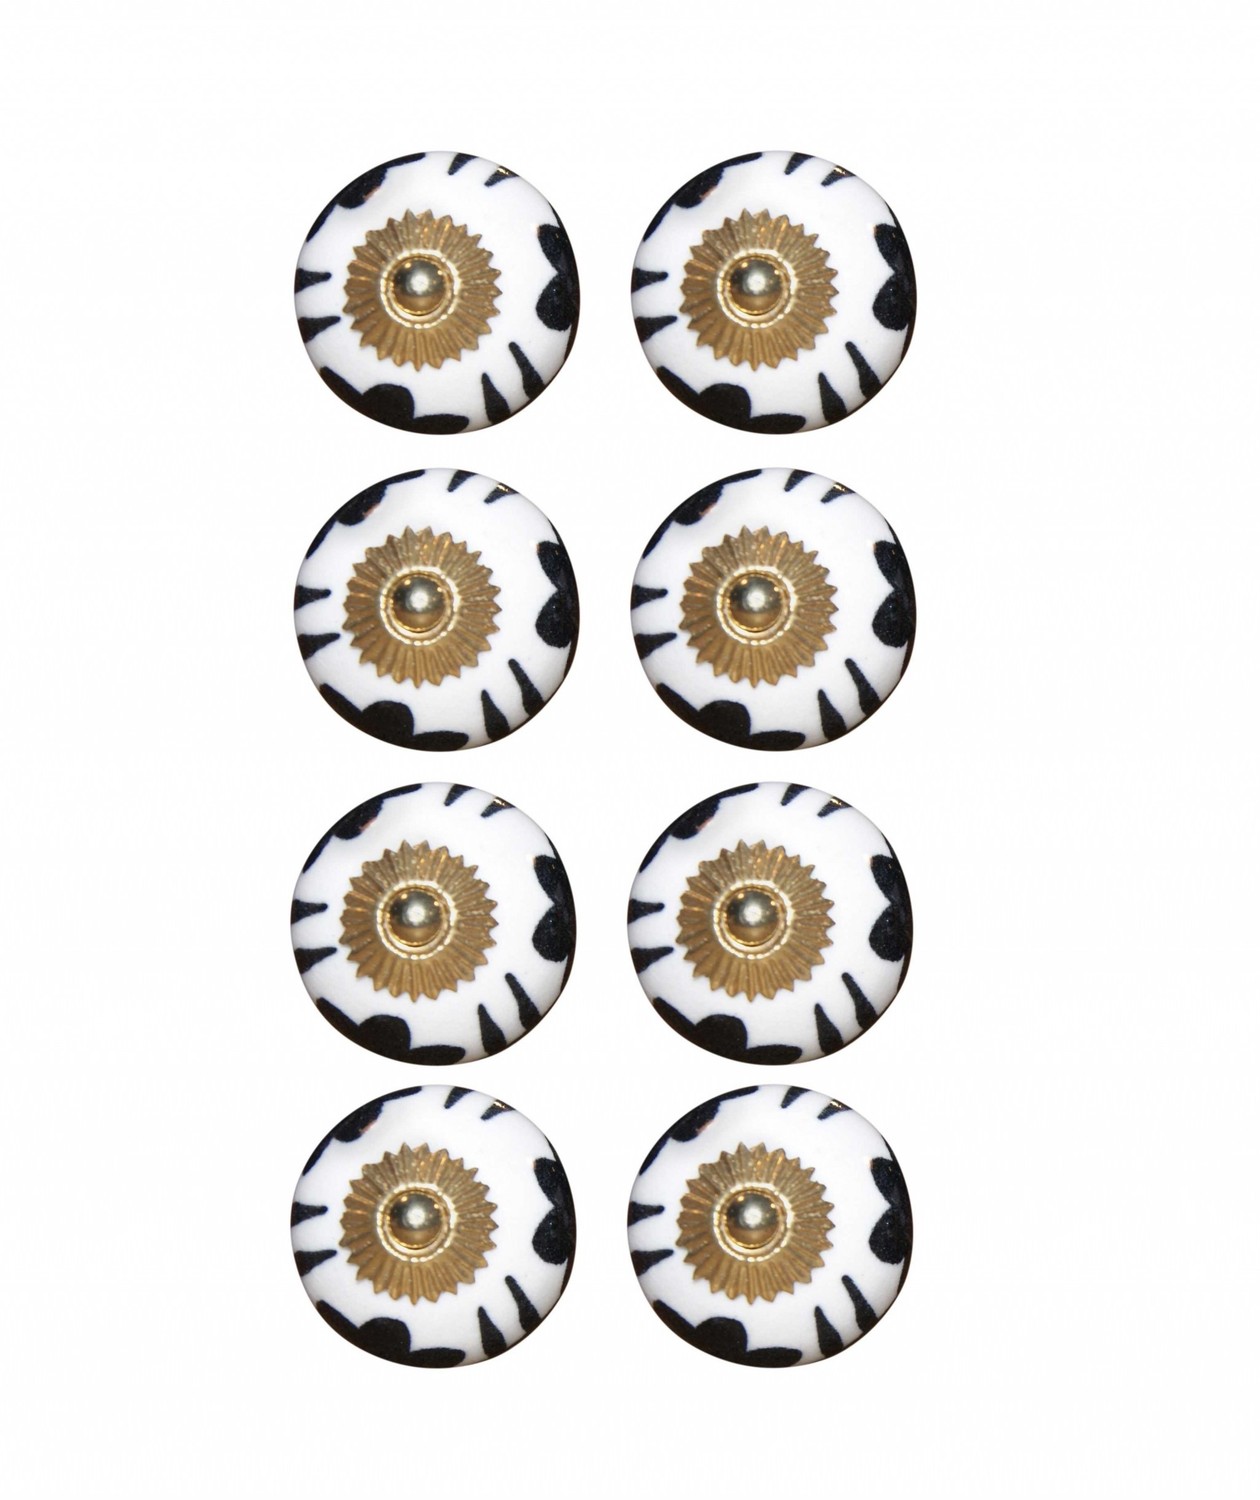 1.5" x 1.5" x 1.5" Black, White And Gold - Knobs 8-Pack